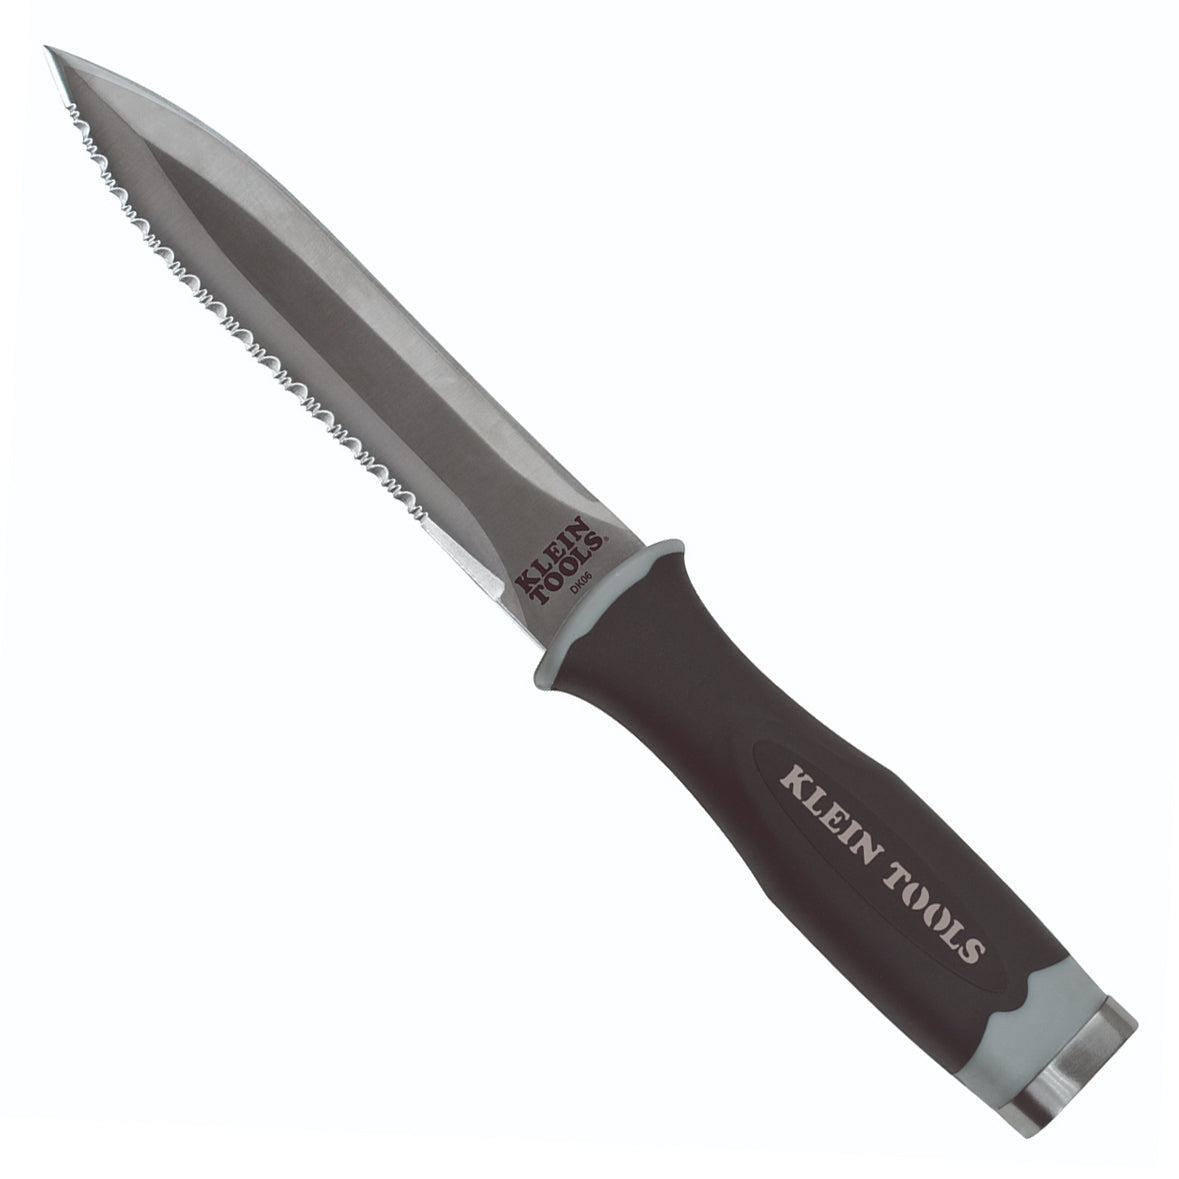 DK06 - Serrated Duct Knife with Sheath